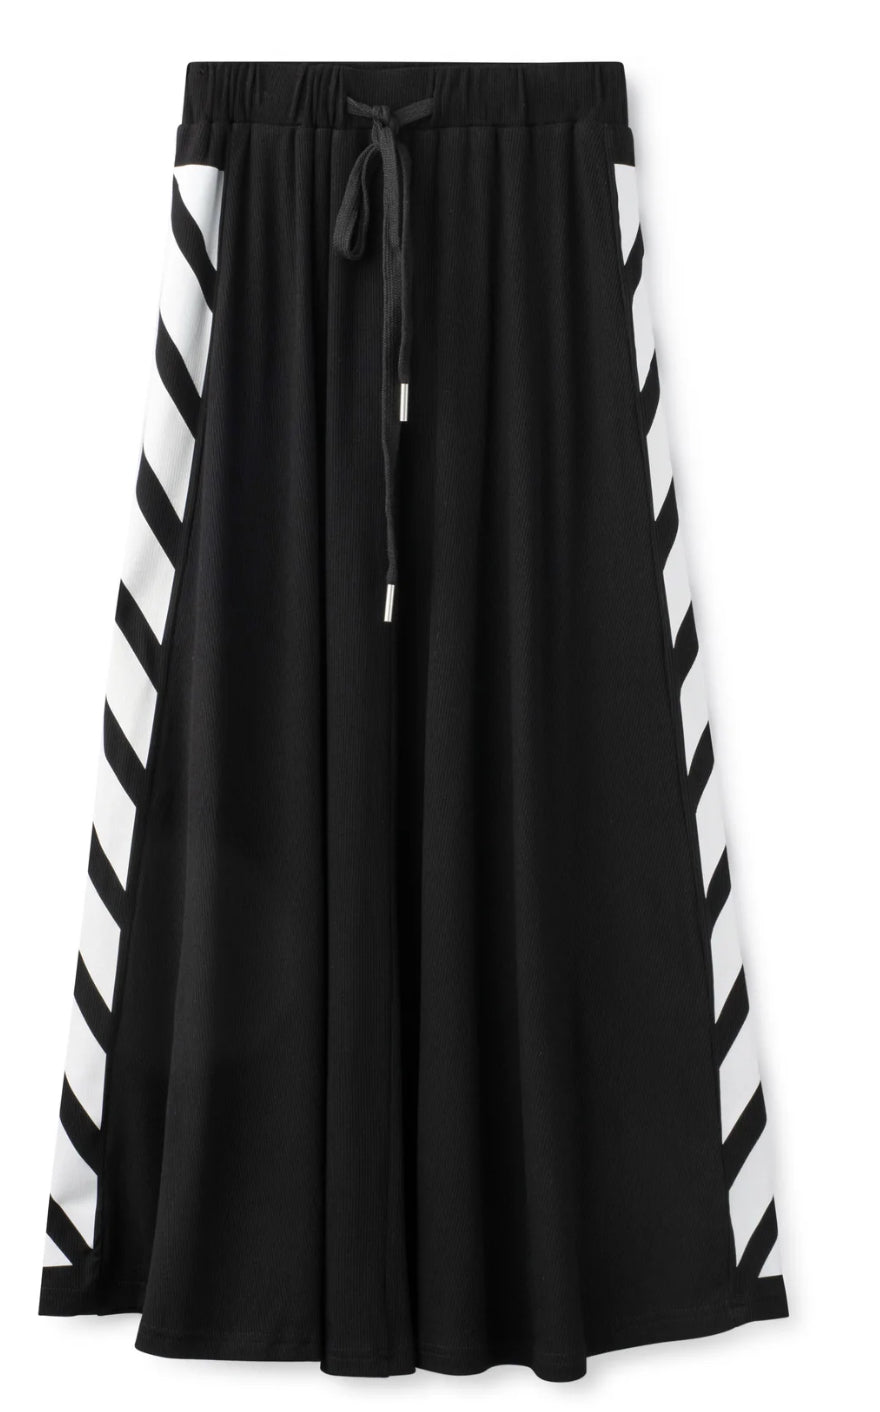 Noname Long Black Ribbed Skirt with White Side Details